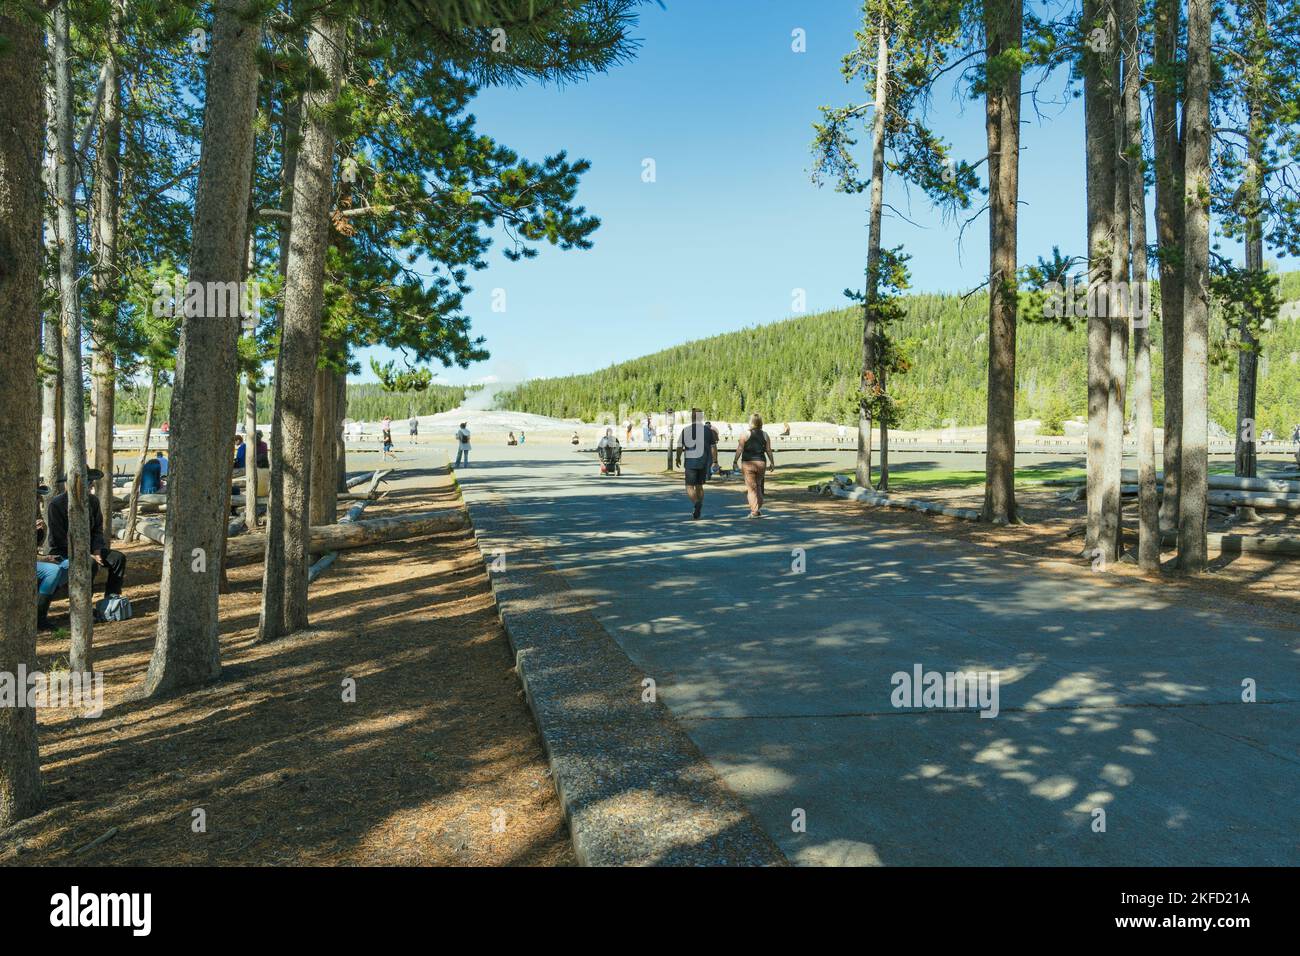 Walkway at Old Faithful Geyser just ended the steam eruption. Pine tree forest surrounds the area and many tourists walk here in Yellowstone Park. Stock Photo